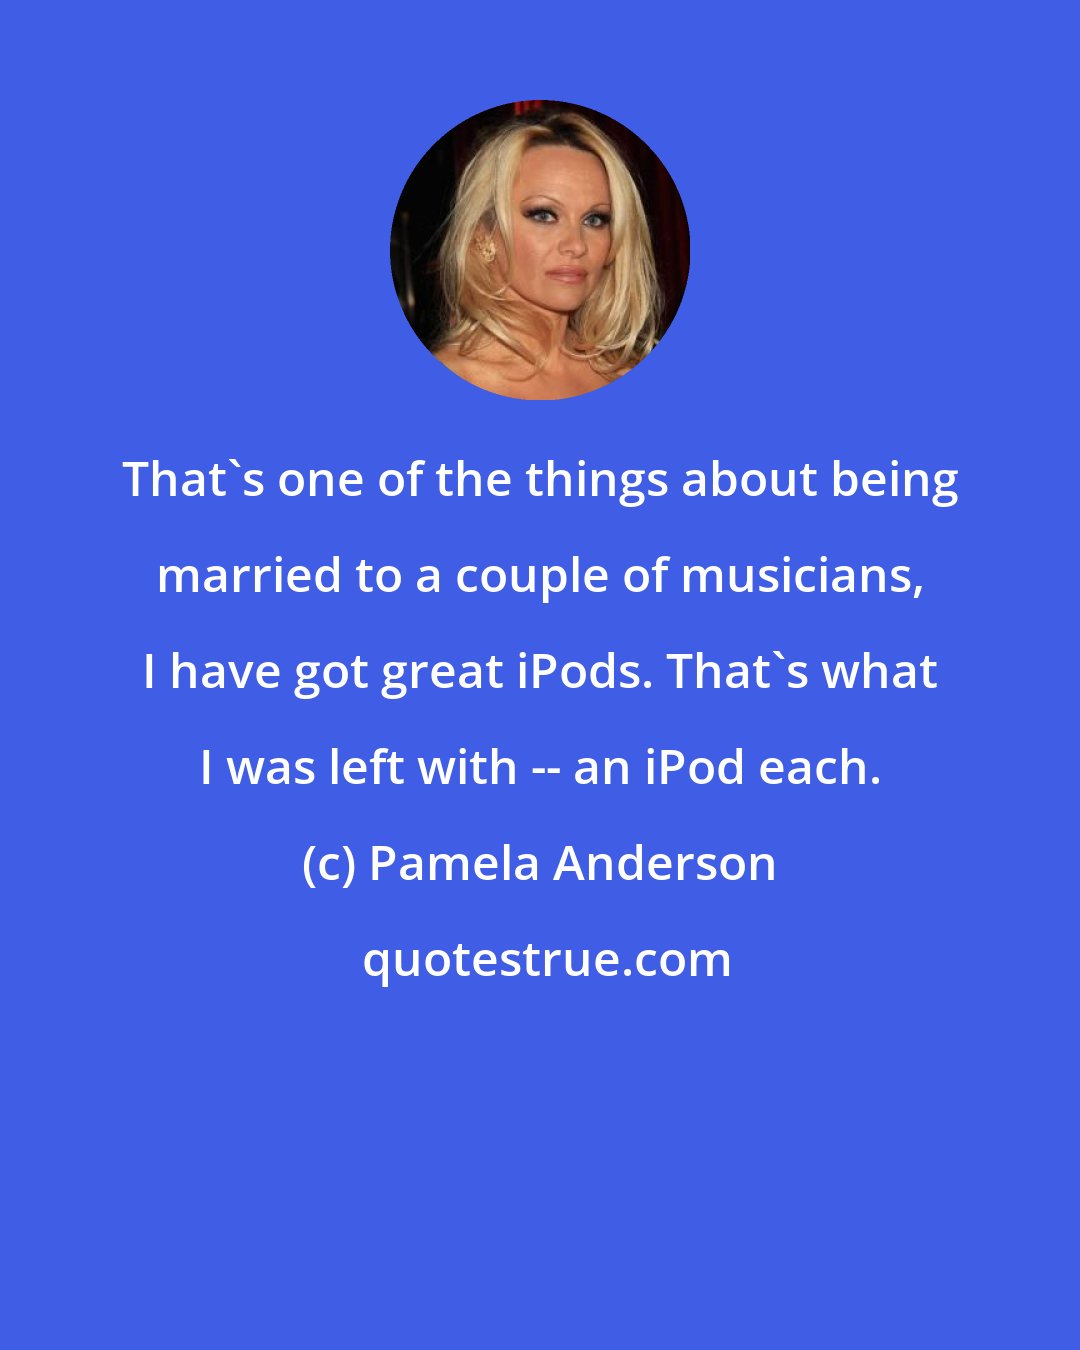 Pamela Anderson: That's one of the things about being married to a couple of musicians, I have got great iPods. That's what I was left with -- an iPod each.